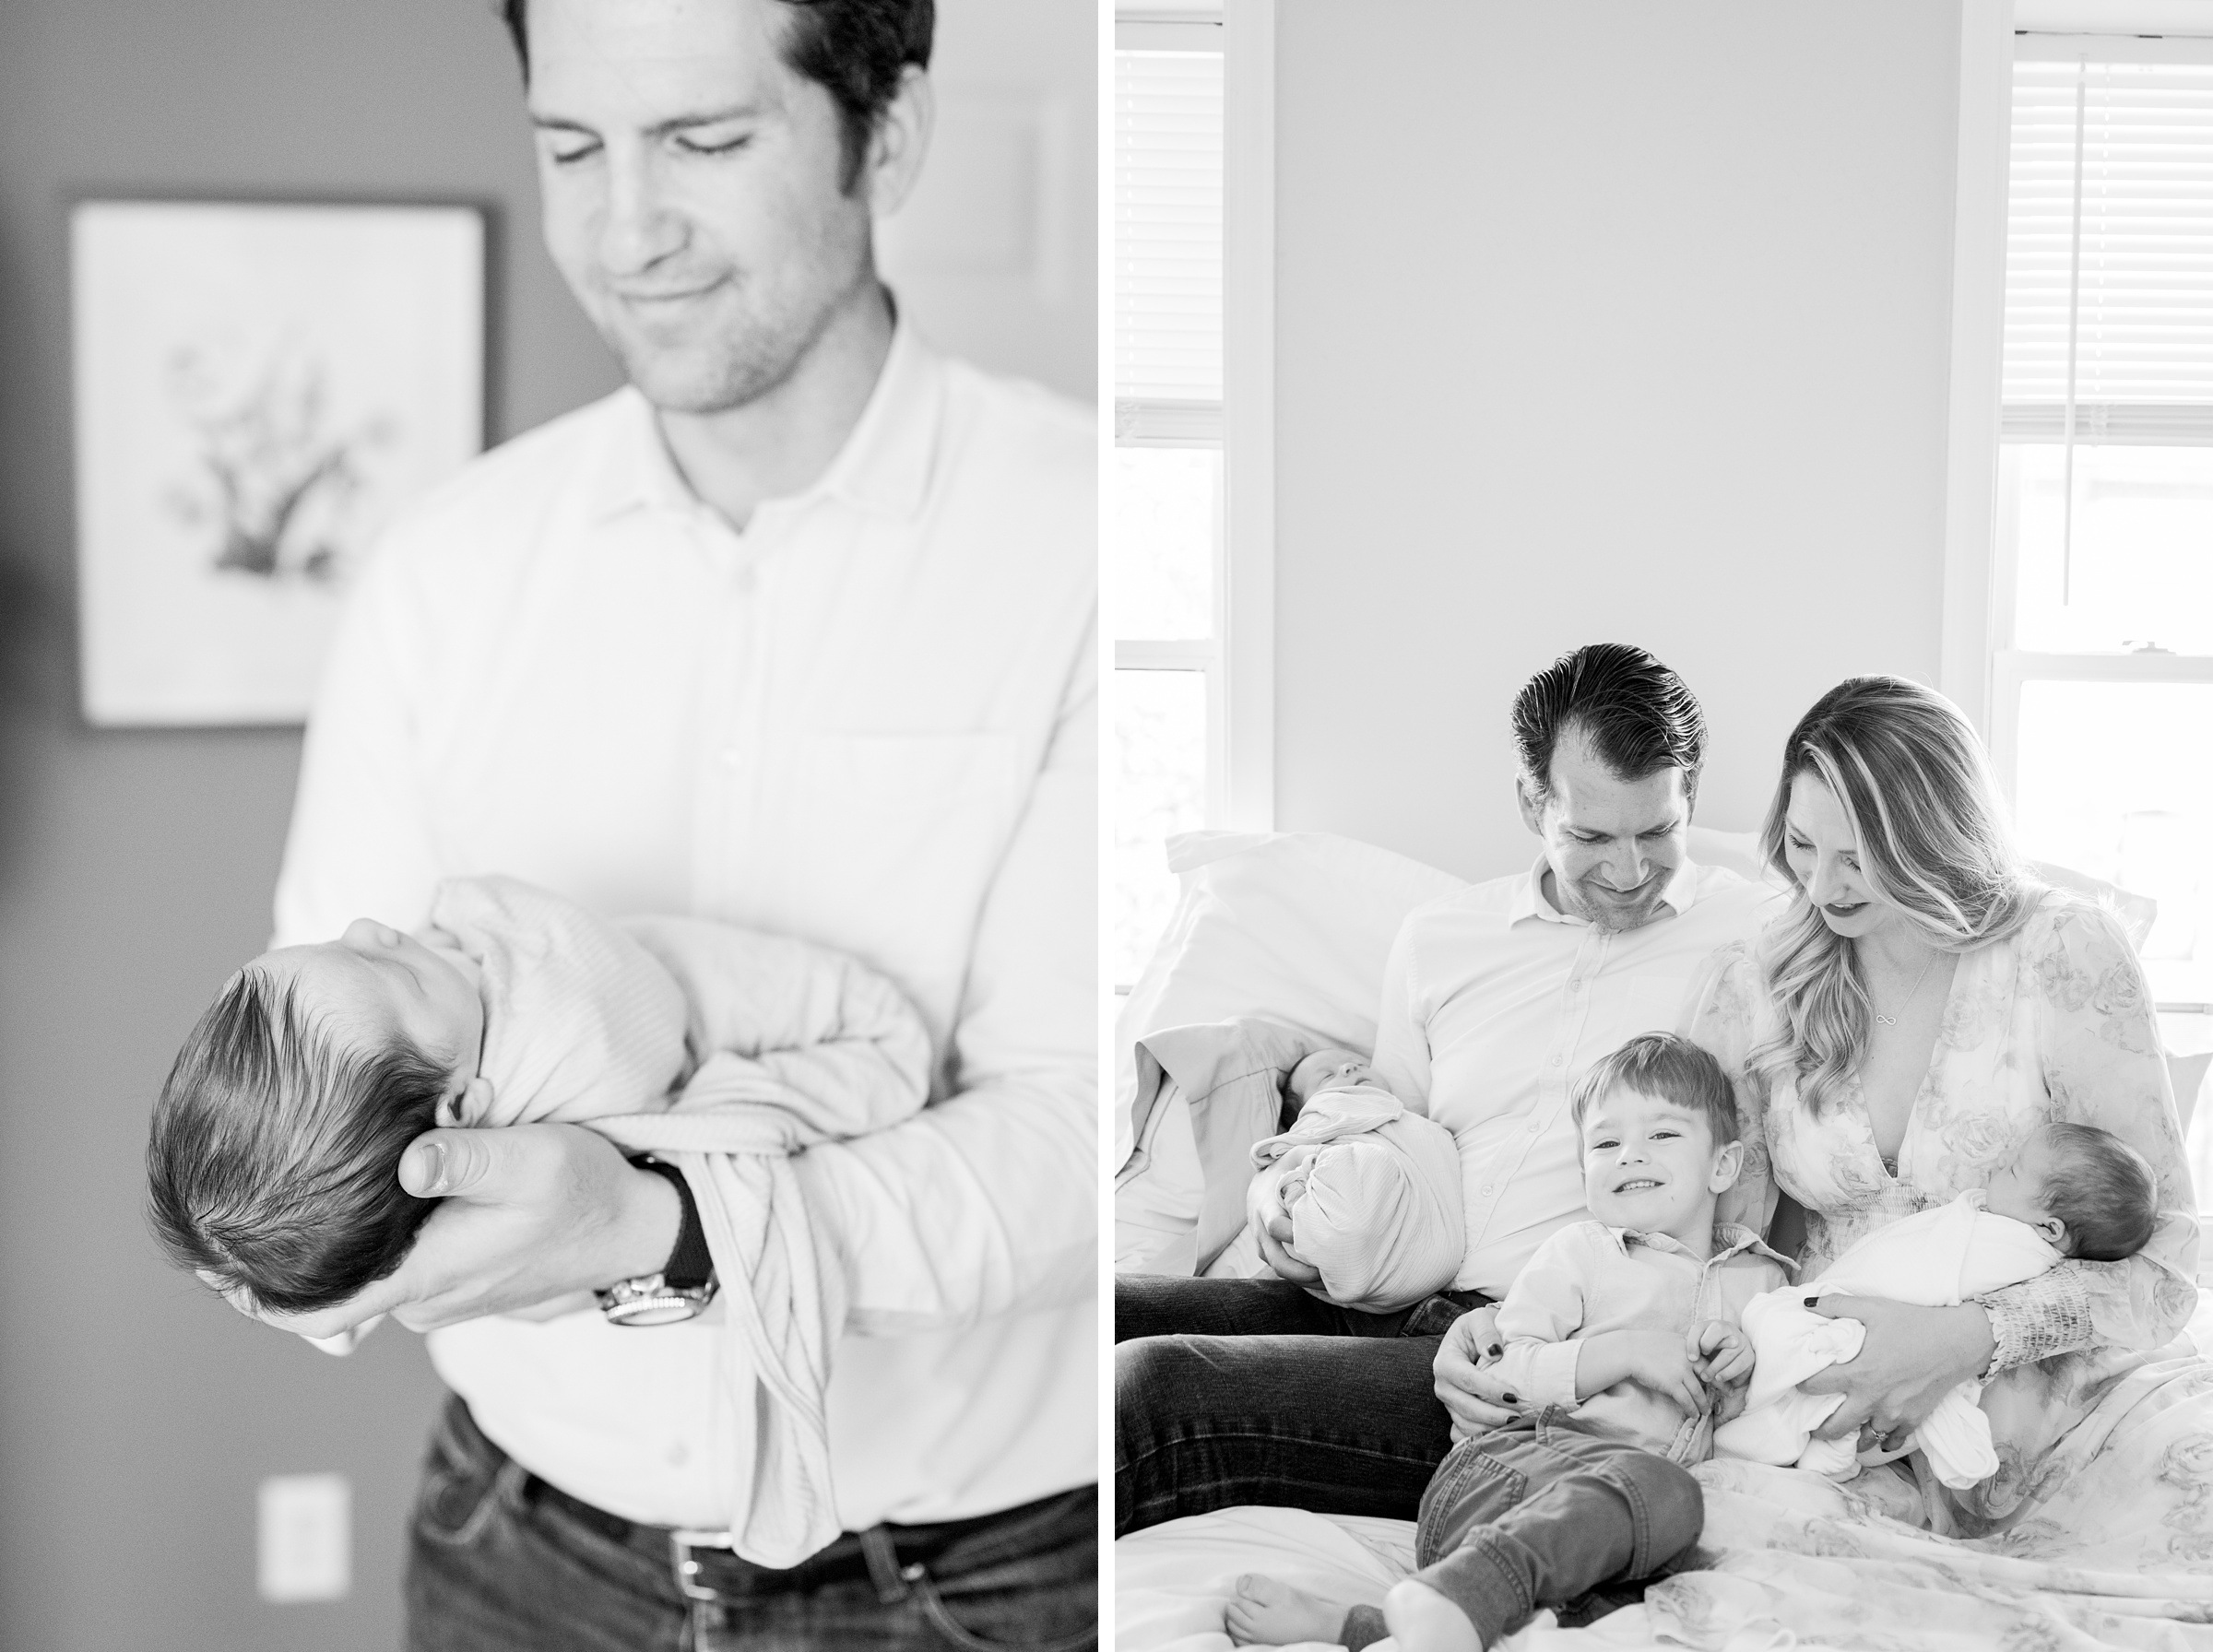 In-home newborn photography session photographed by Newborn Photographer in Baltimore, Maryland Cait Kramer.